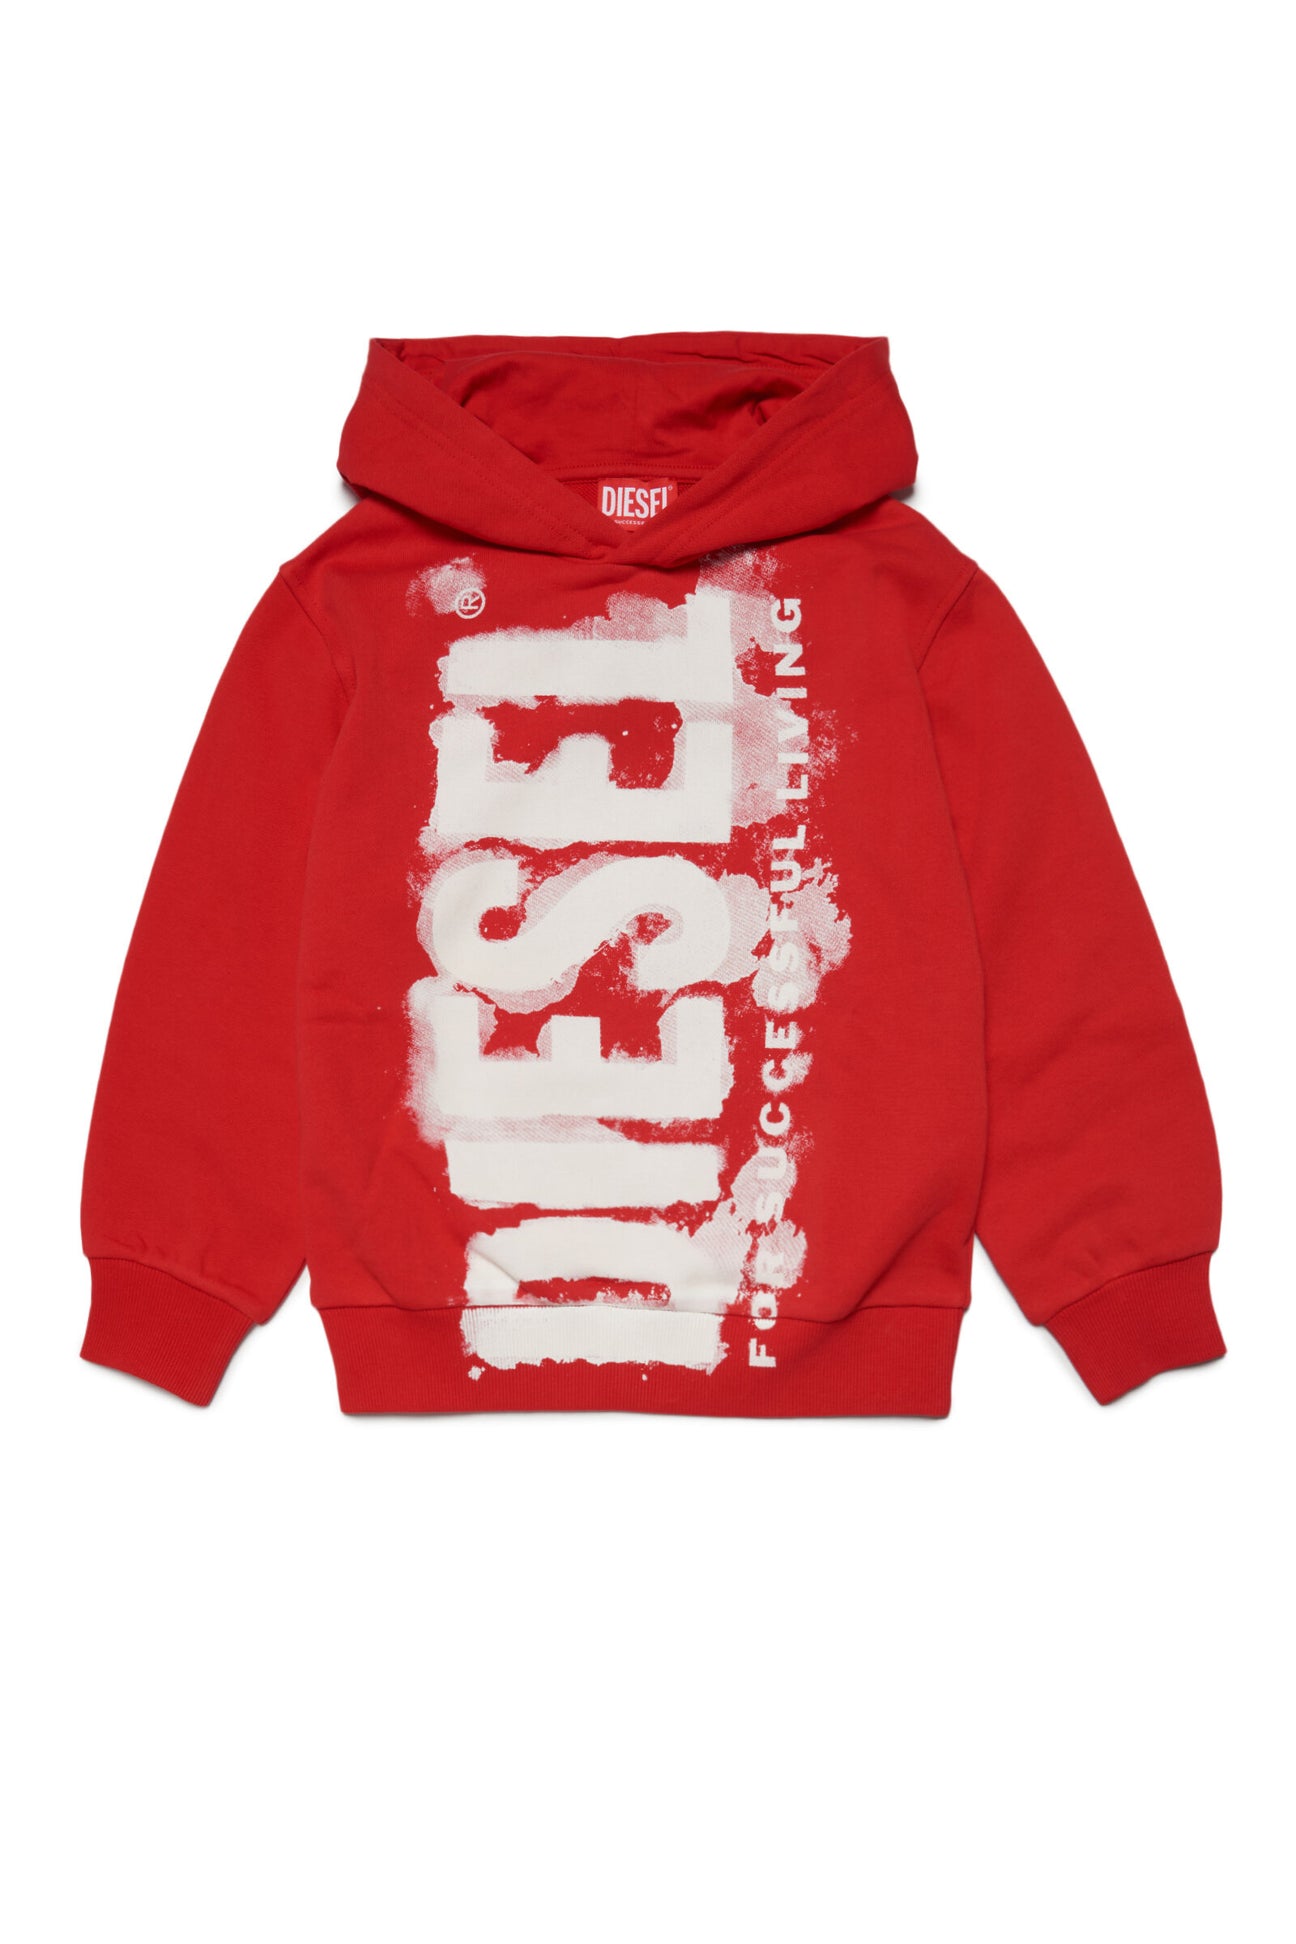 Red hooded sweatshirt with watercolor effect logo 